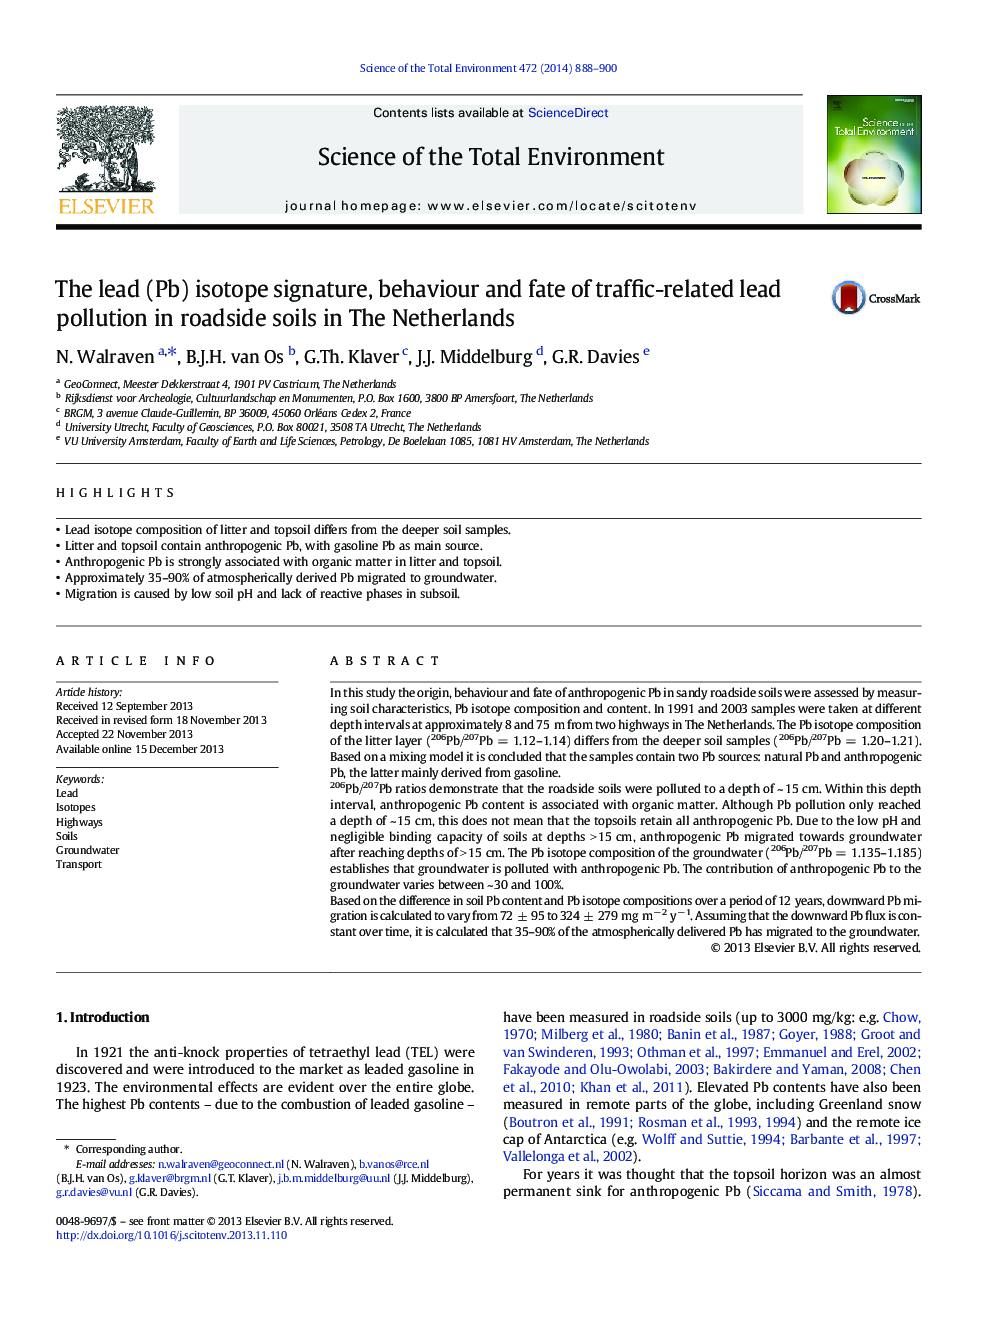 The lead (Pb) isotope signature, behaviour and fate of traffic-related lead pollution in roadside soils in The Netherlands